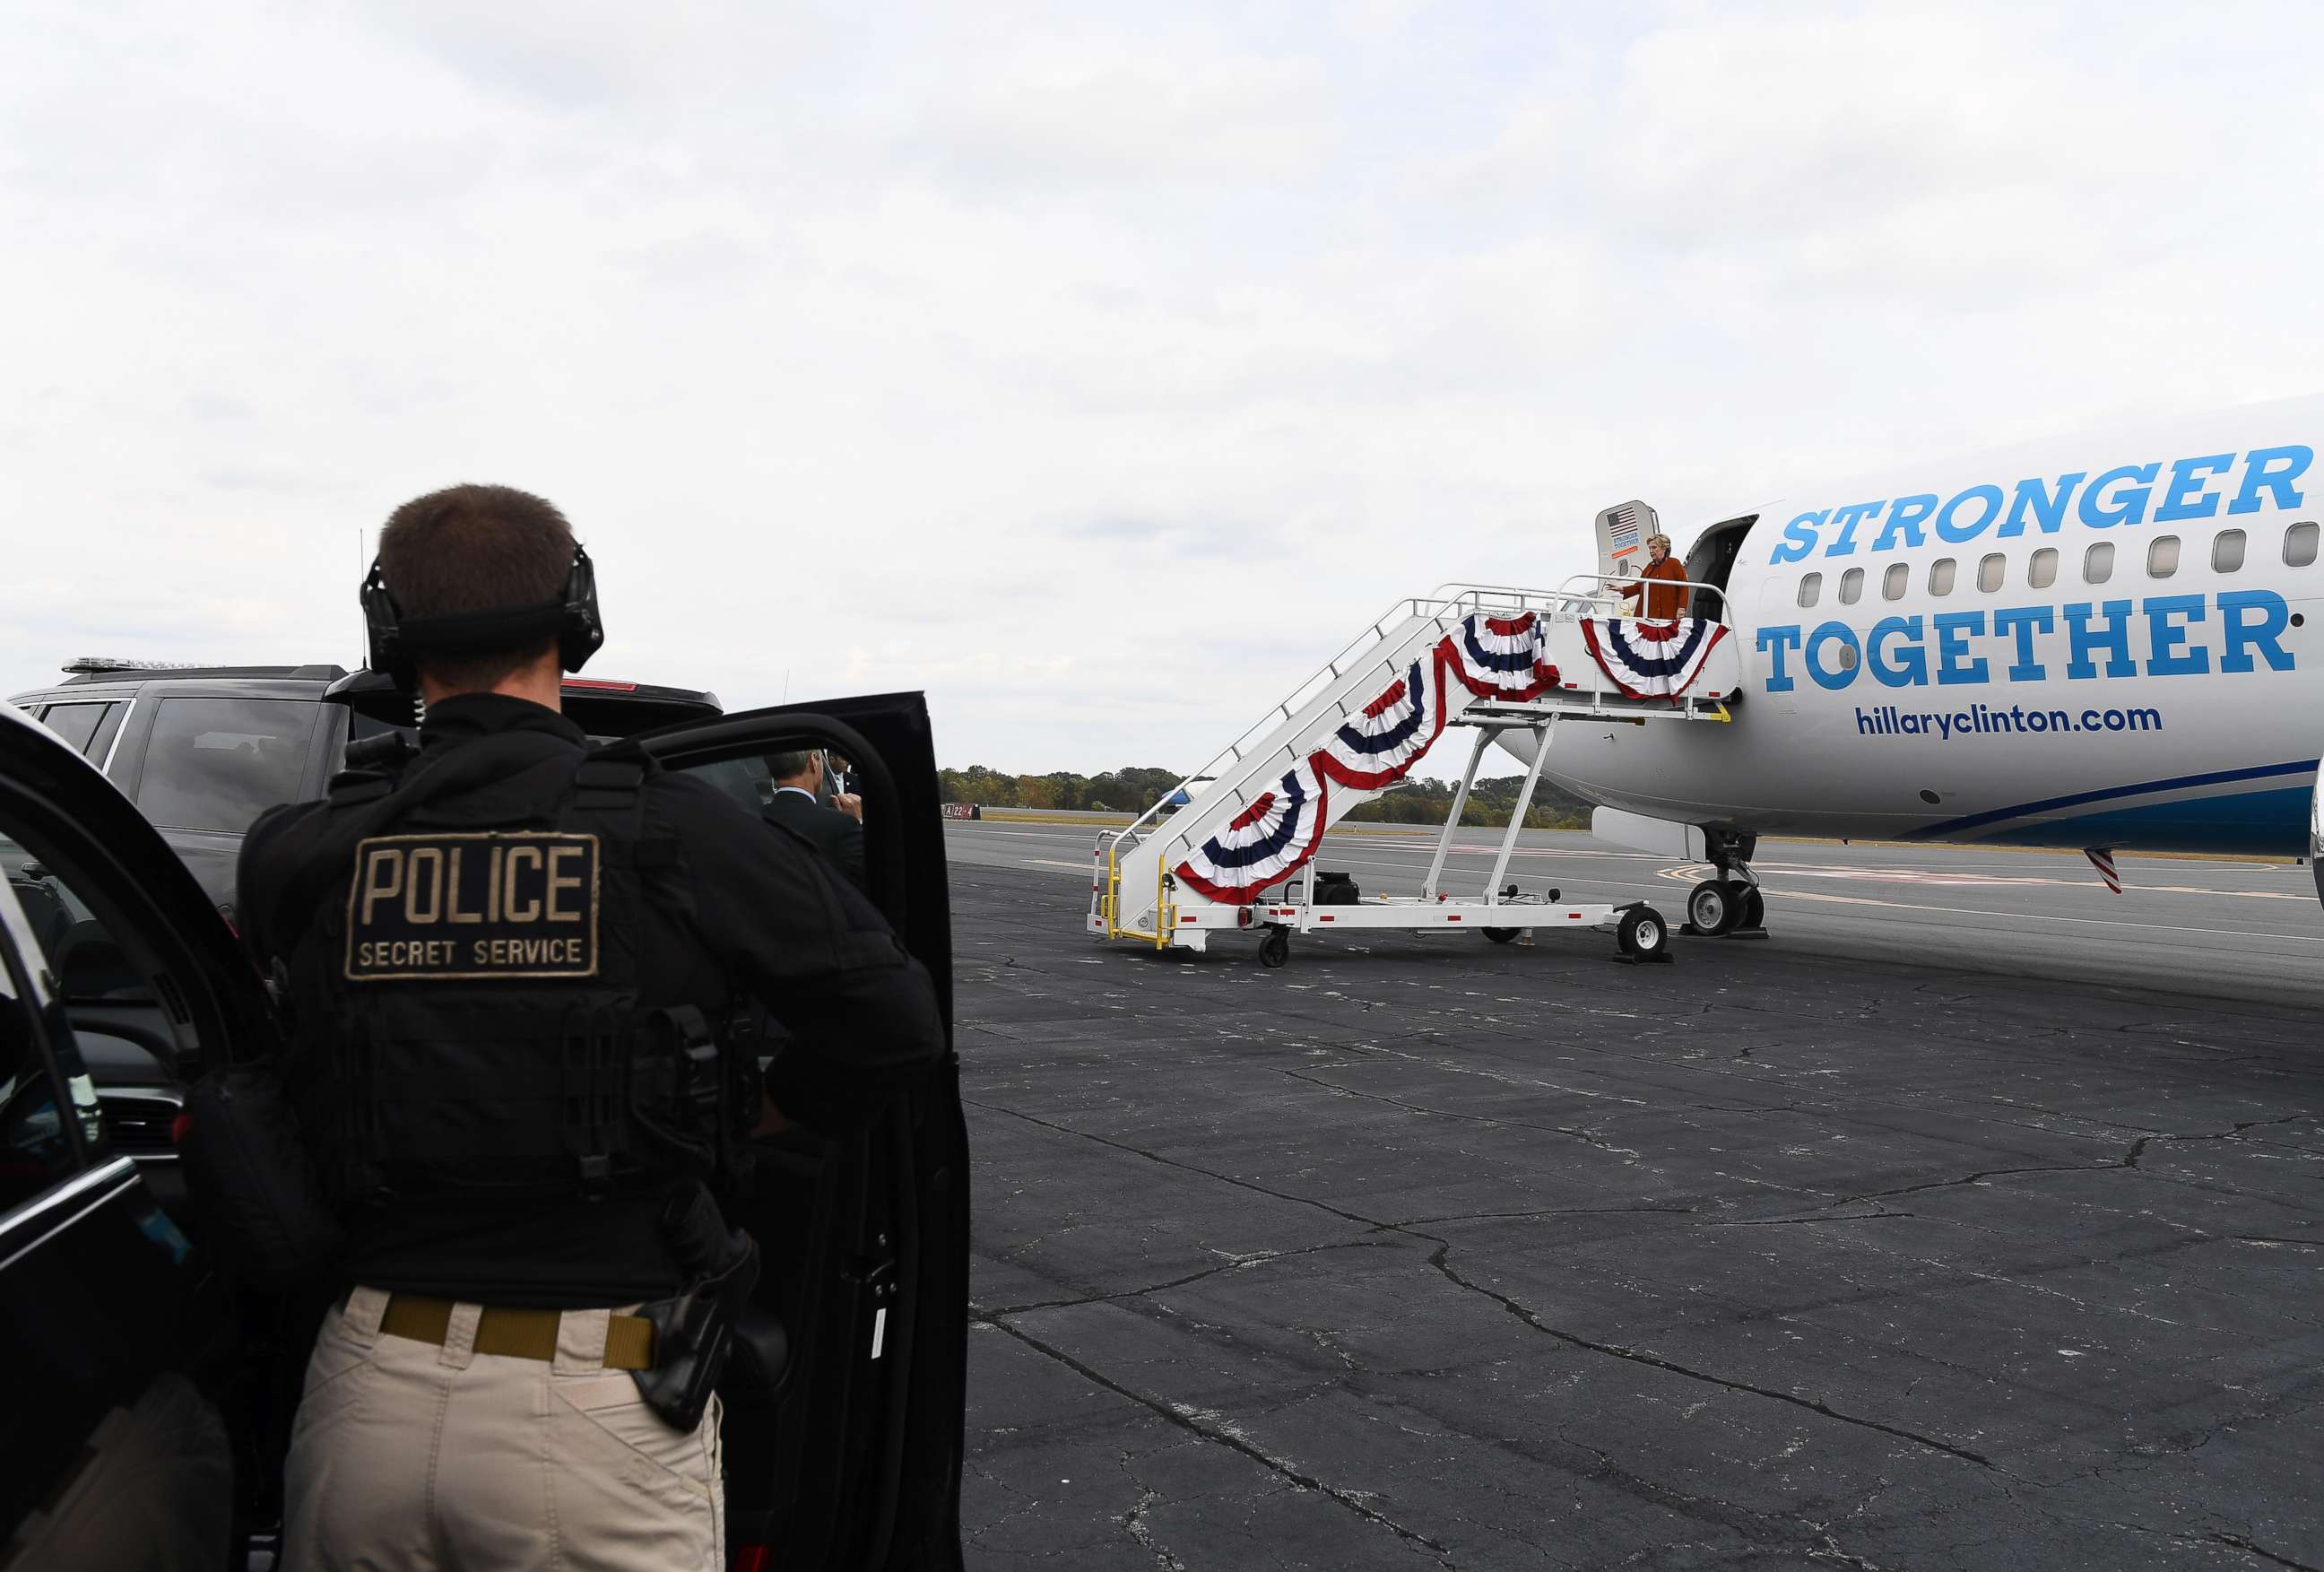 PHOTO: A member of the Secret Service watches US Democratic presidential nominee Hillary Clinton step off her campaign plane,in Winston-Salem, North Carolina on October 27, 2016.